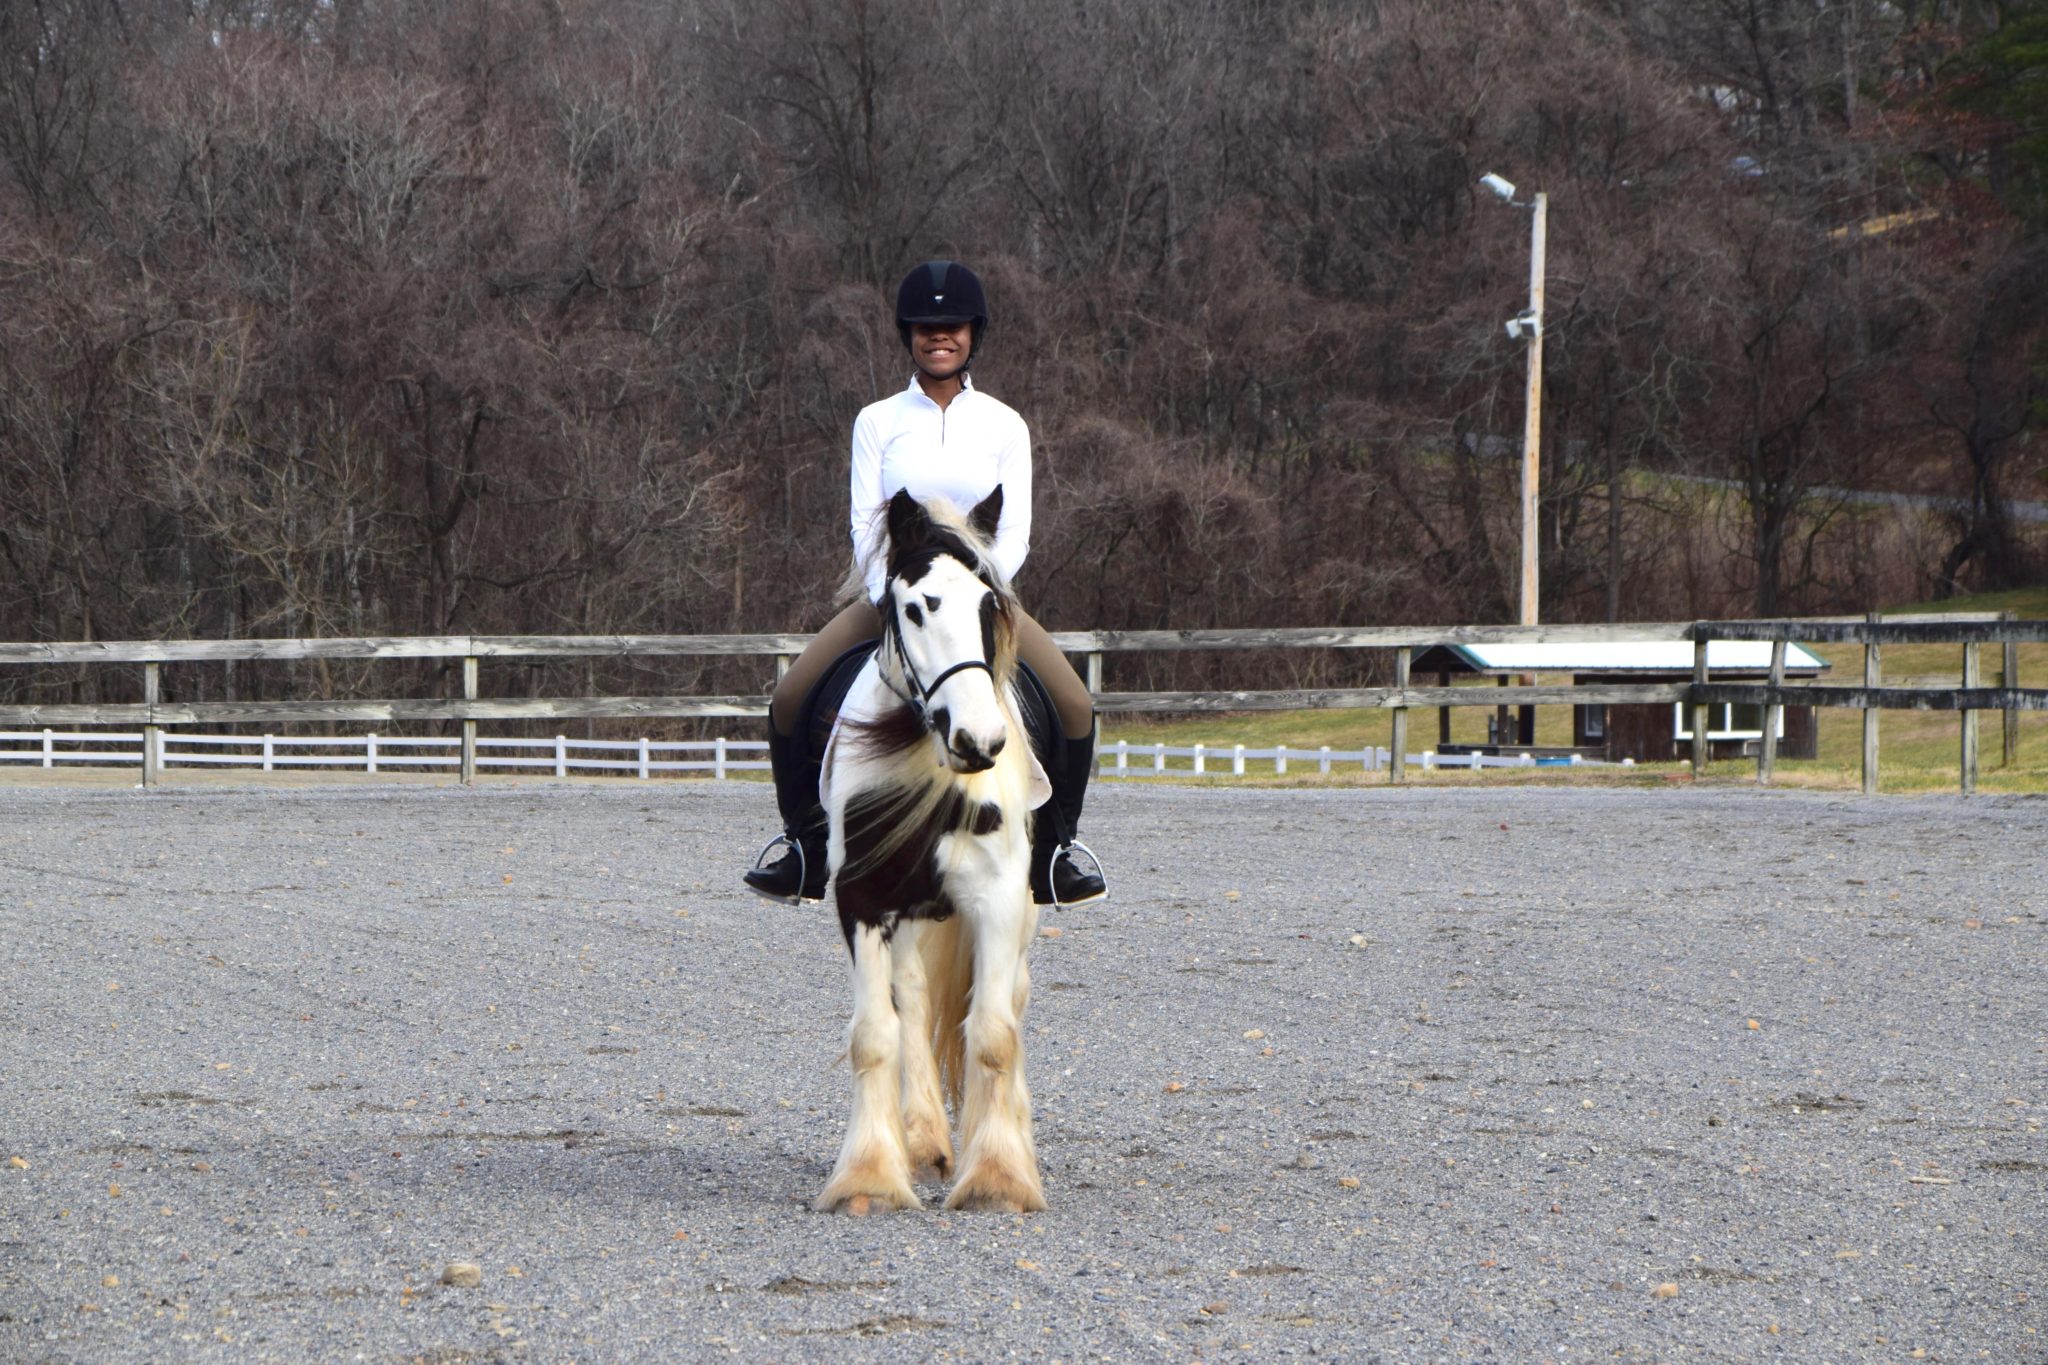 Rookie Rundown: What to Wear to an English Horse Show